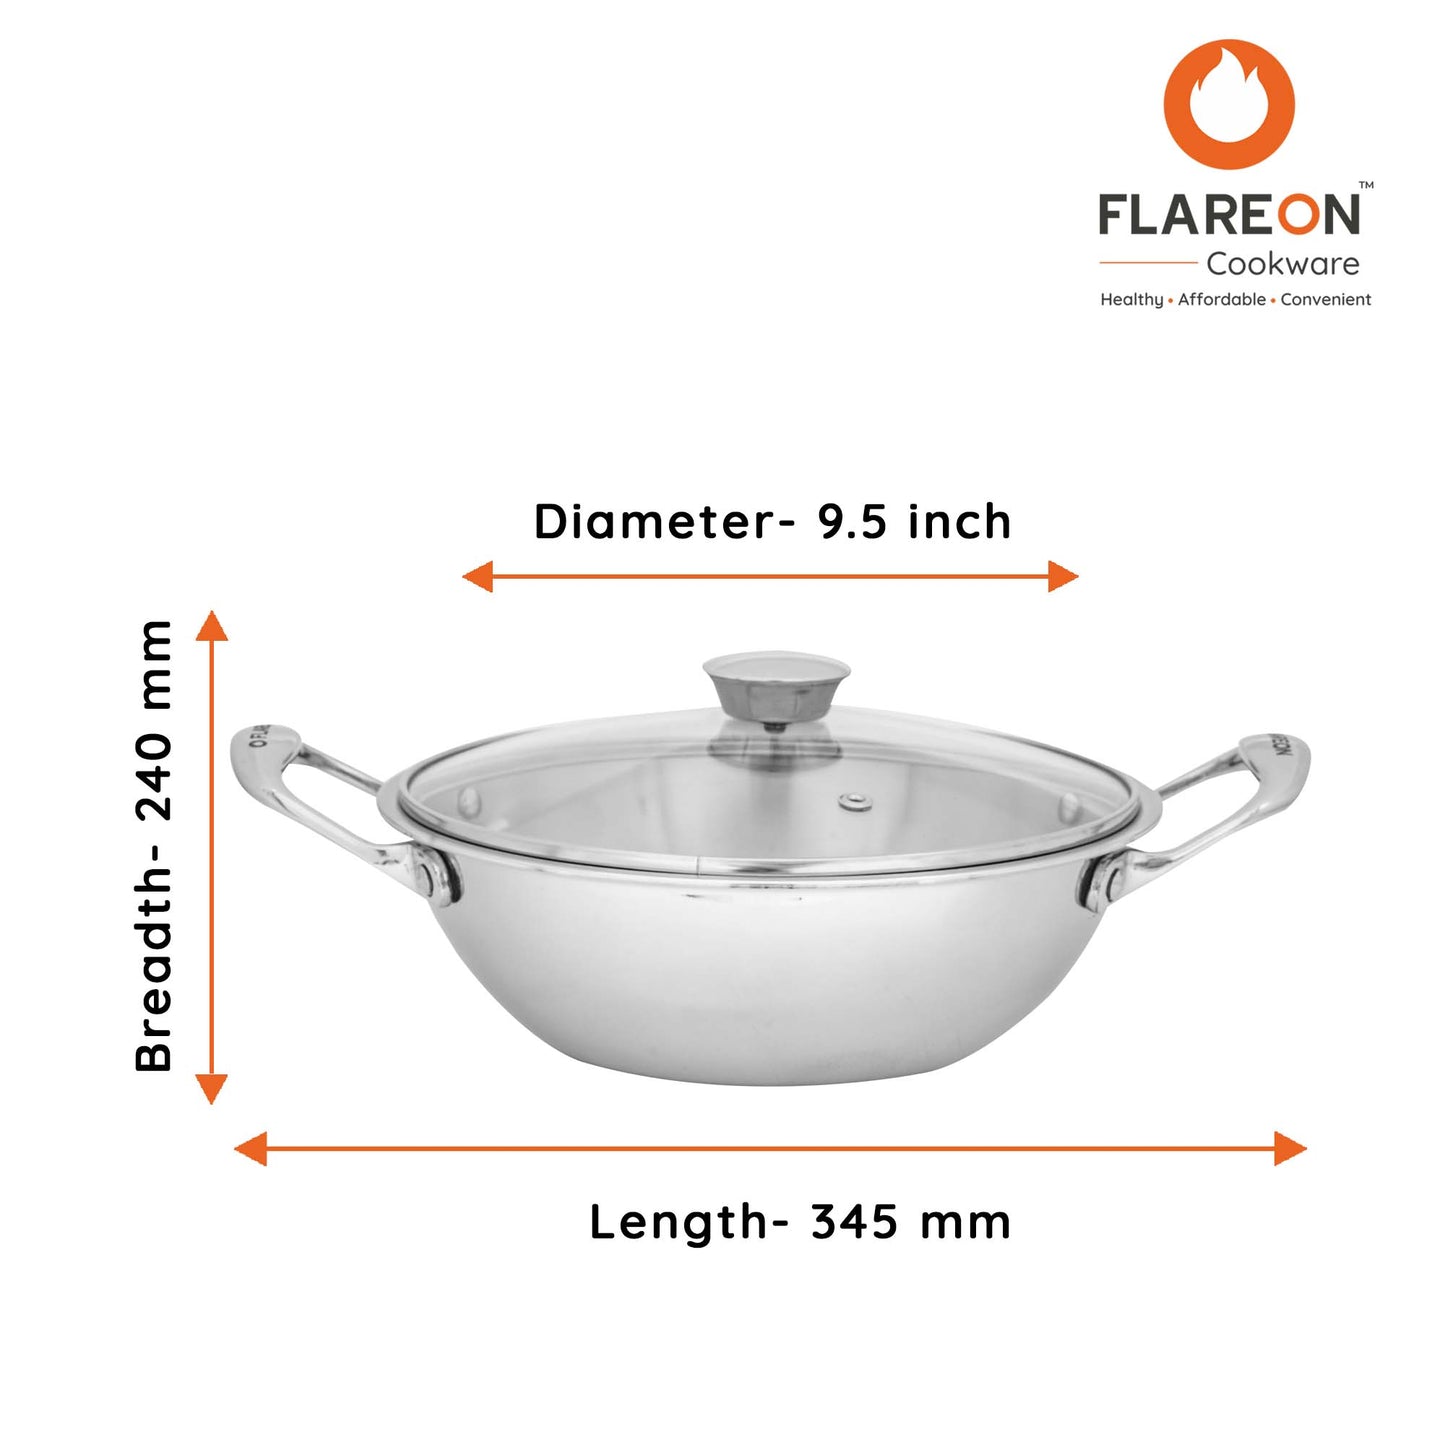 FlareOn's TriPly Stainless Steel Kadai With Glass Lid 24 Cm- Product Dimensions